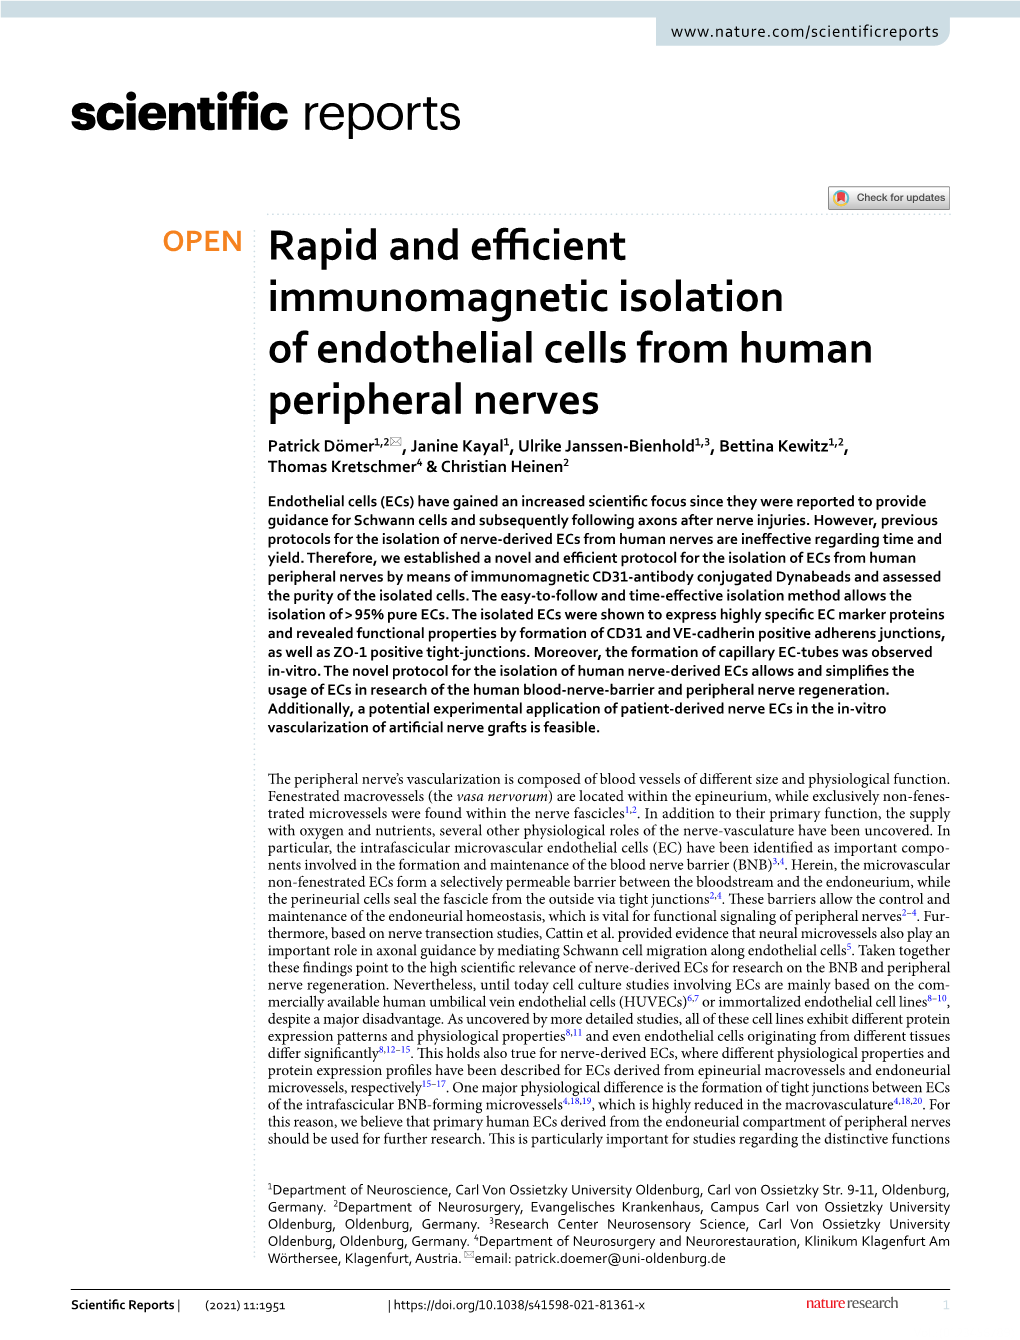 Rapid and Efficient Immunomagnetic Isolation of Endothelial Cells From